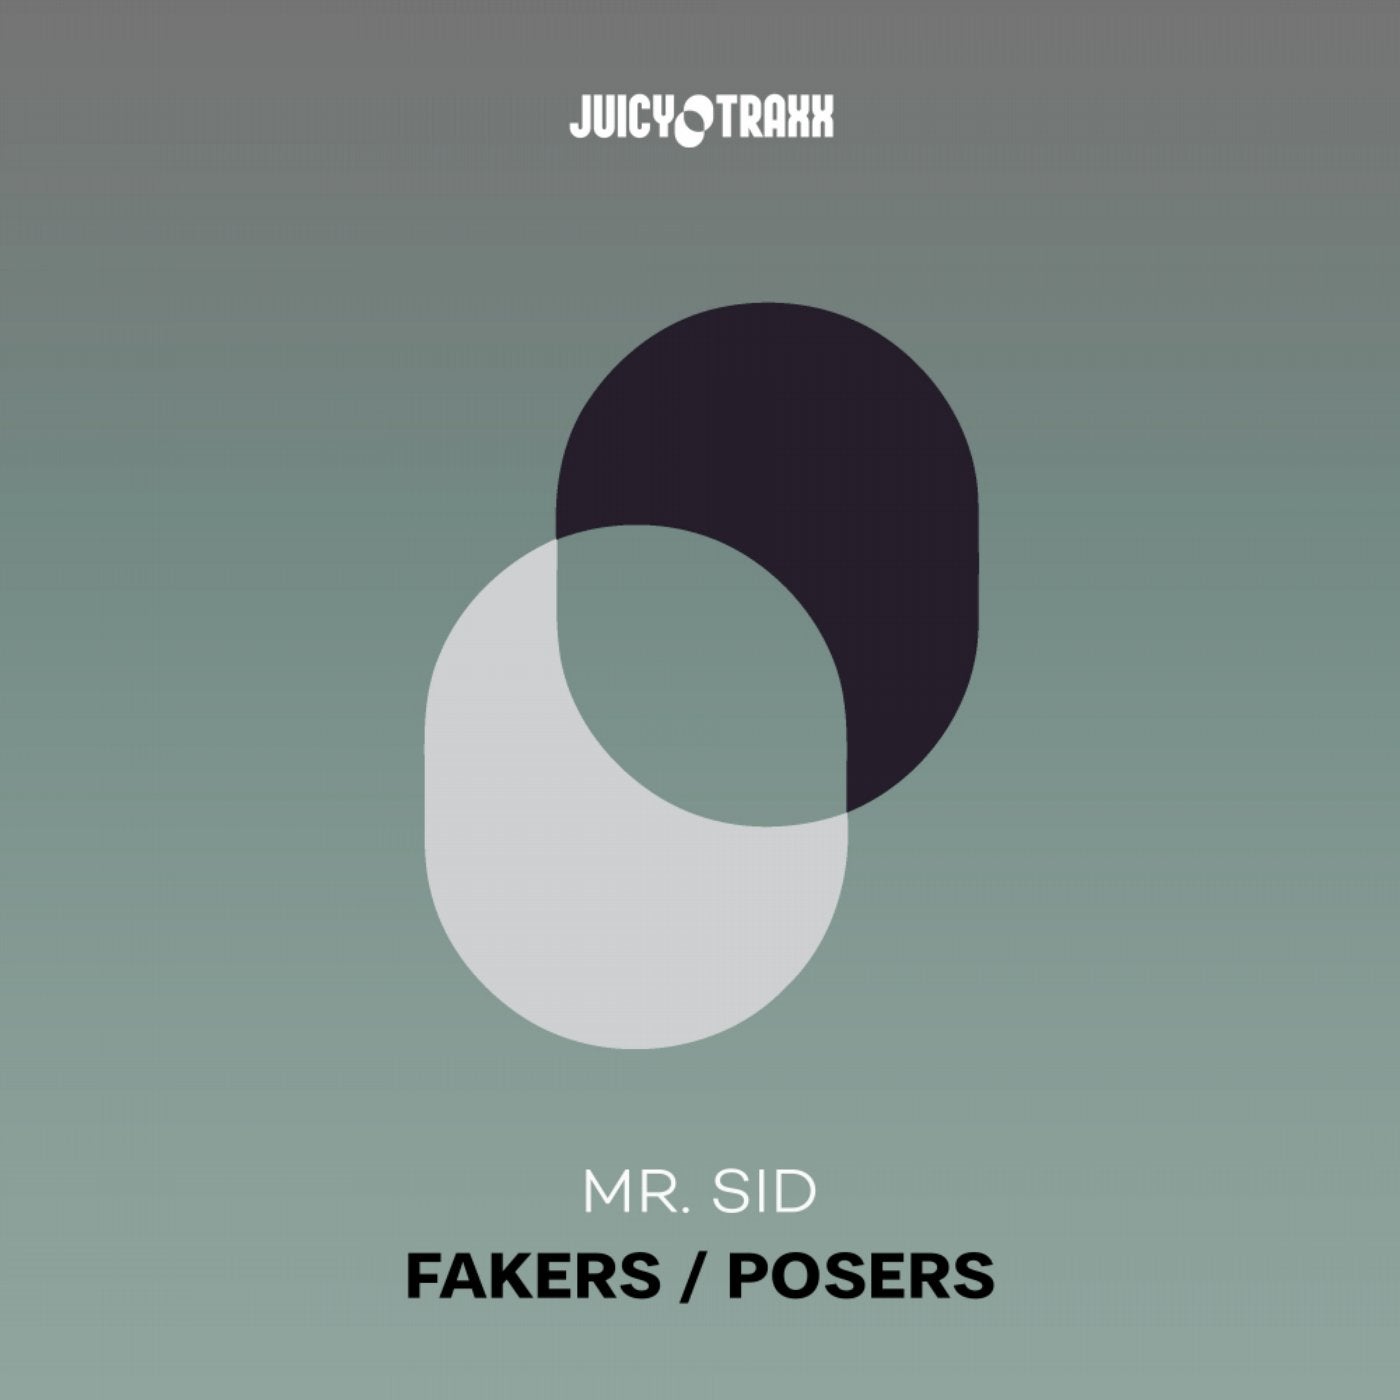 Fakers / Posers